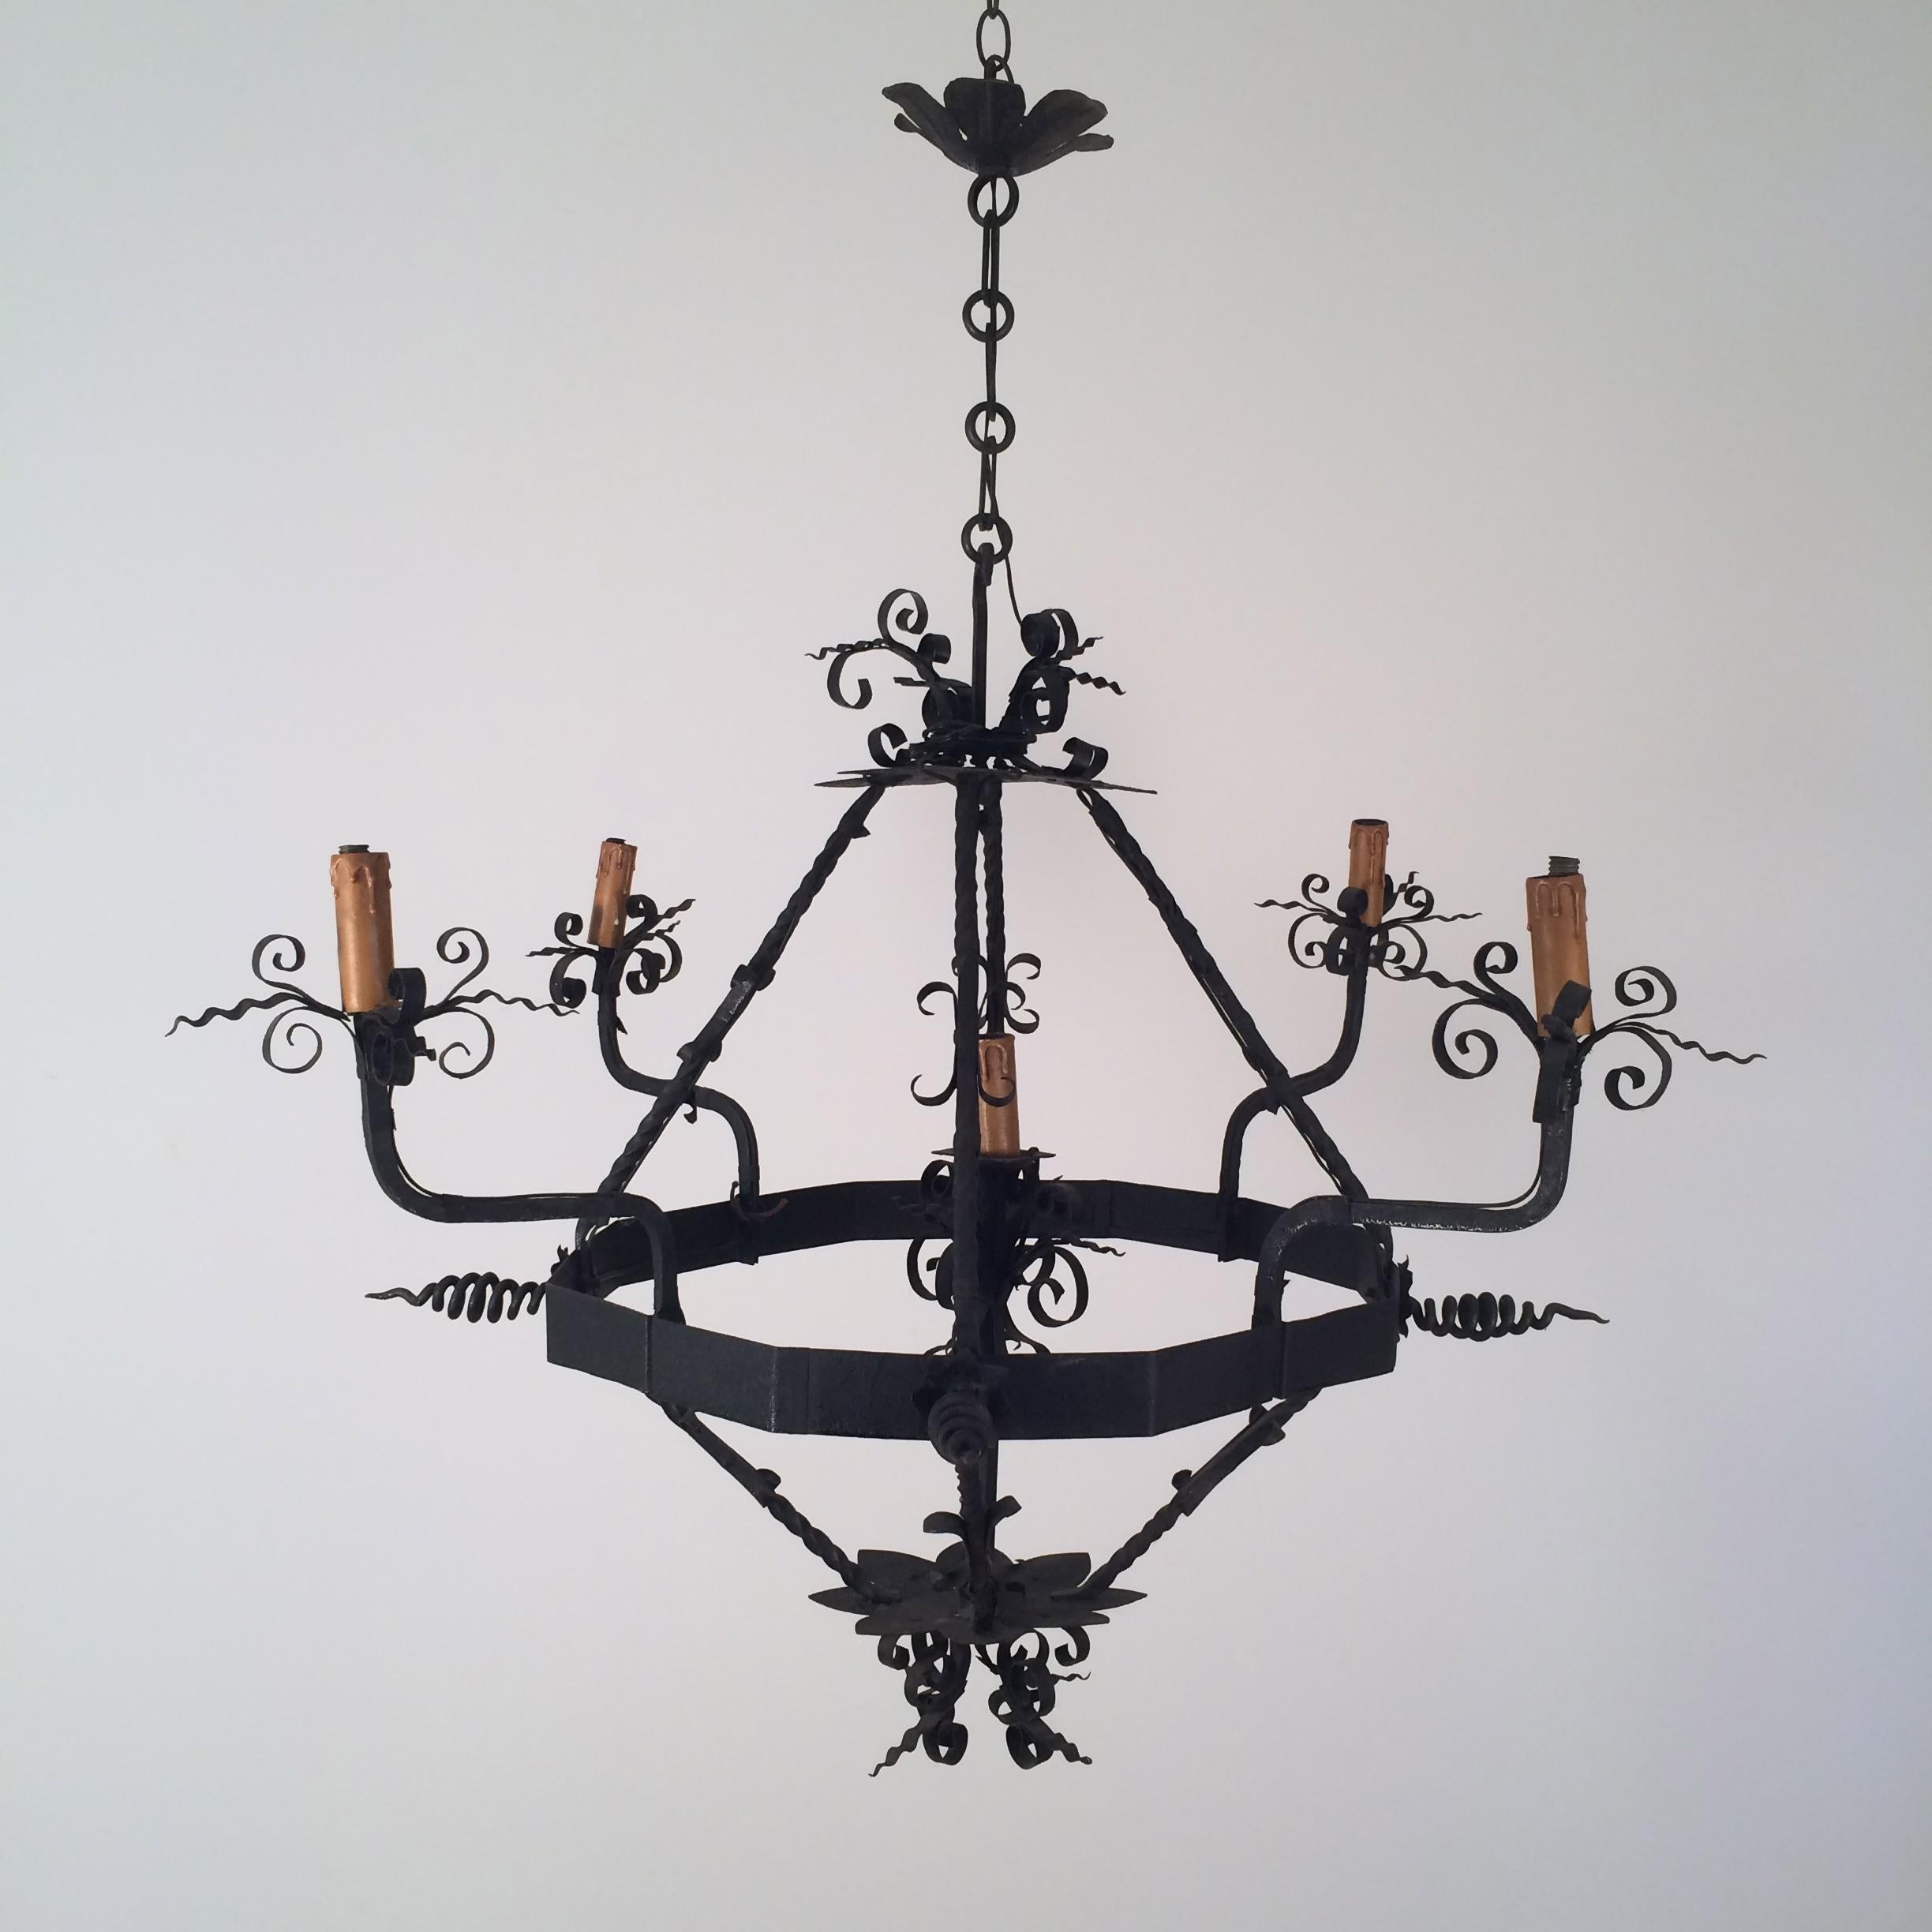 This nice and decorative 5 lights chandelier is made of wrought iron. This is a French work, circa 1940.